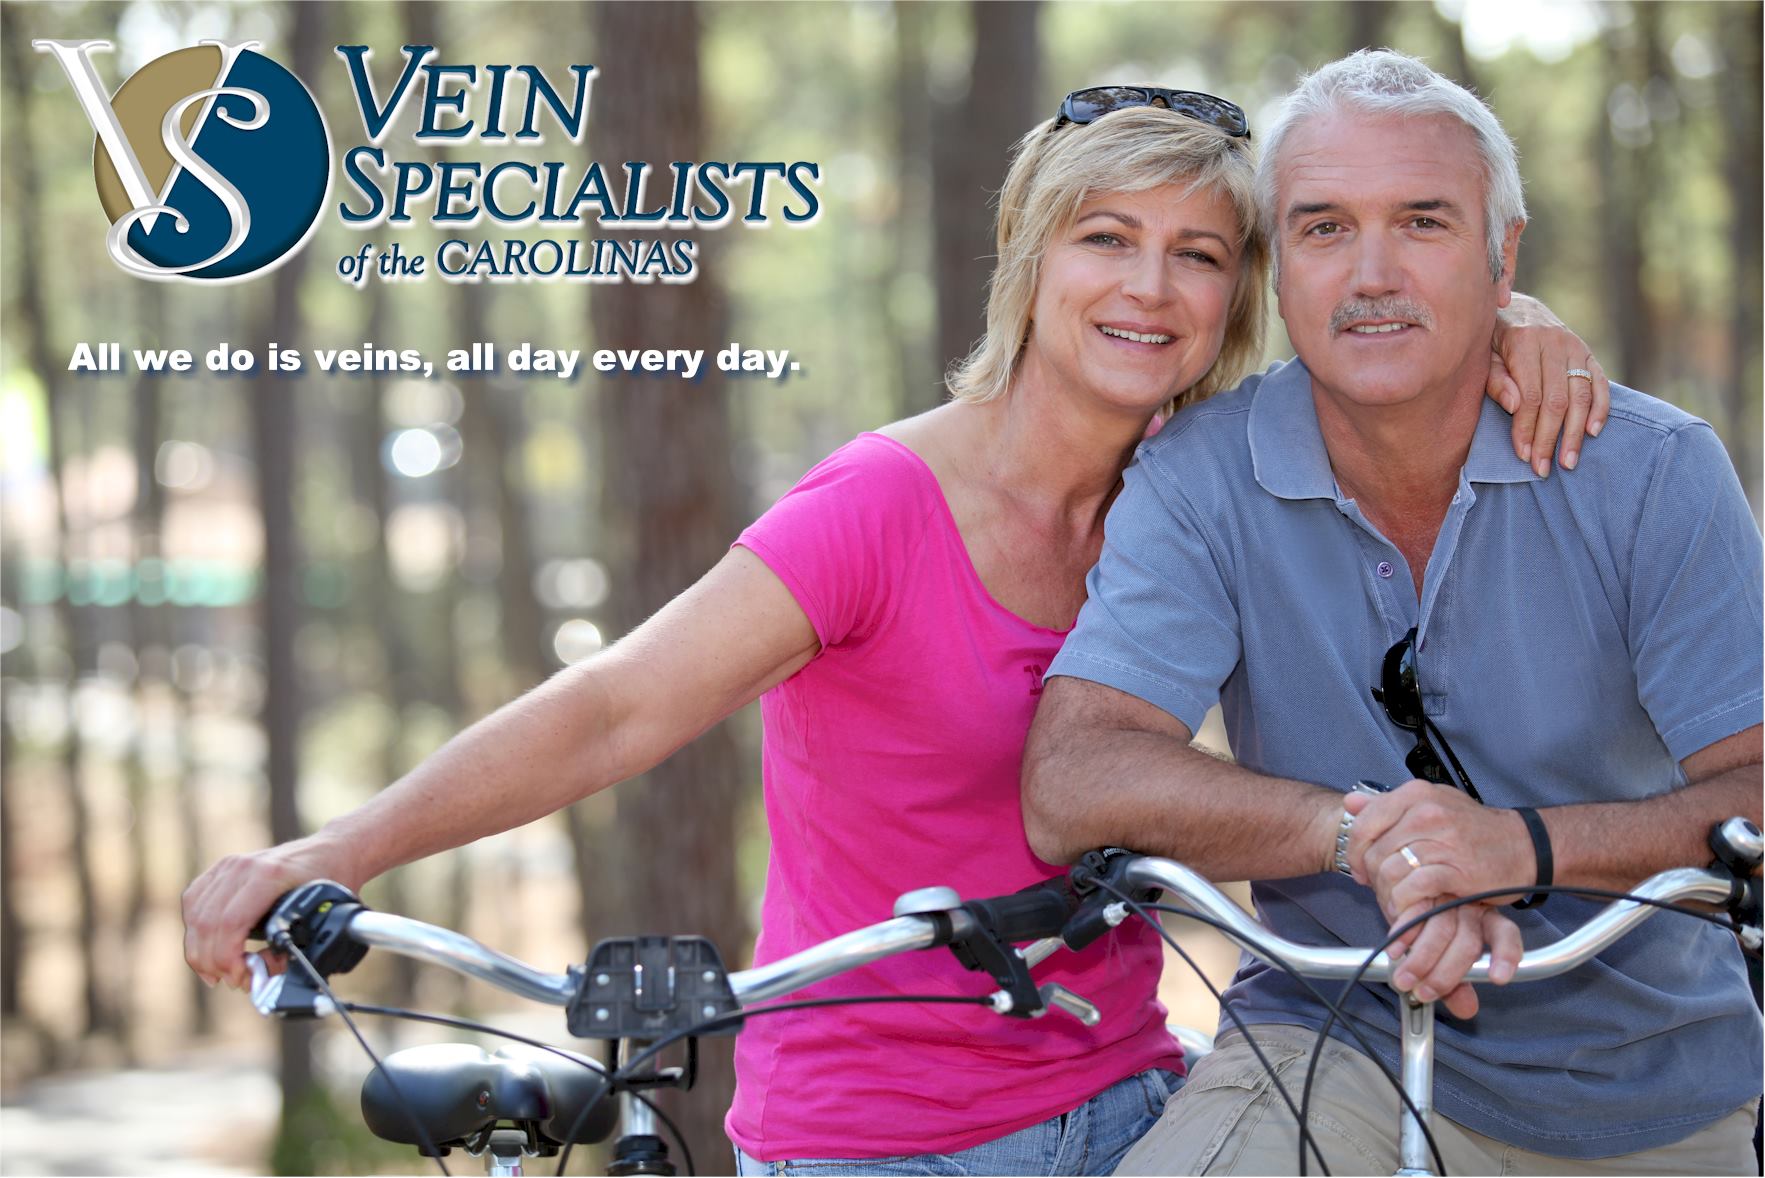 Increased blood circulation will lessen the pain and discomfort associated with varicose and spider veins